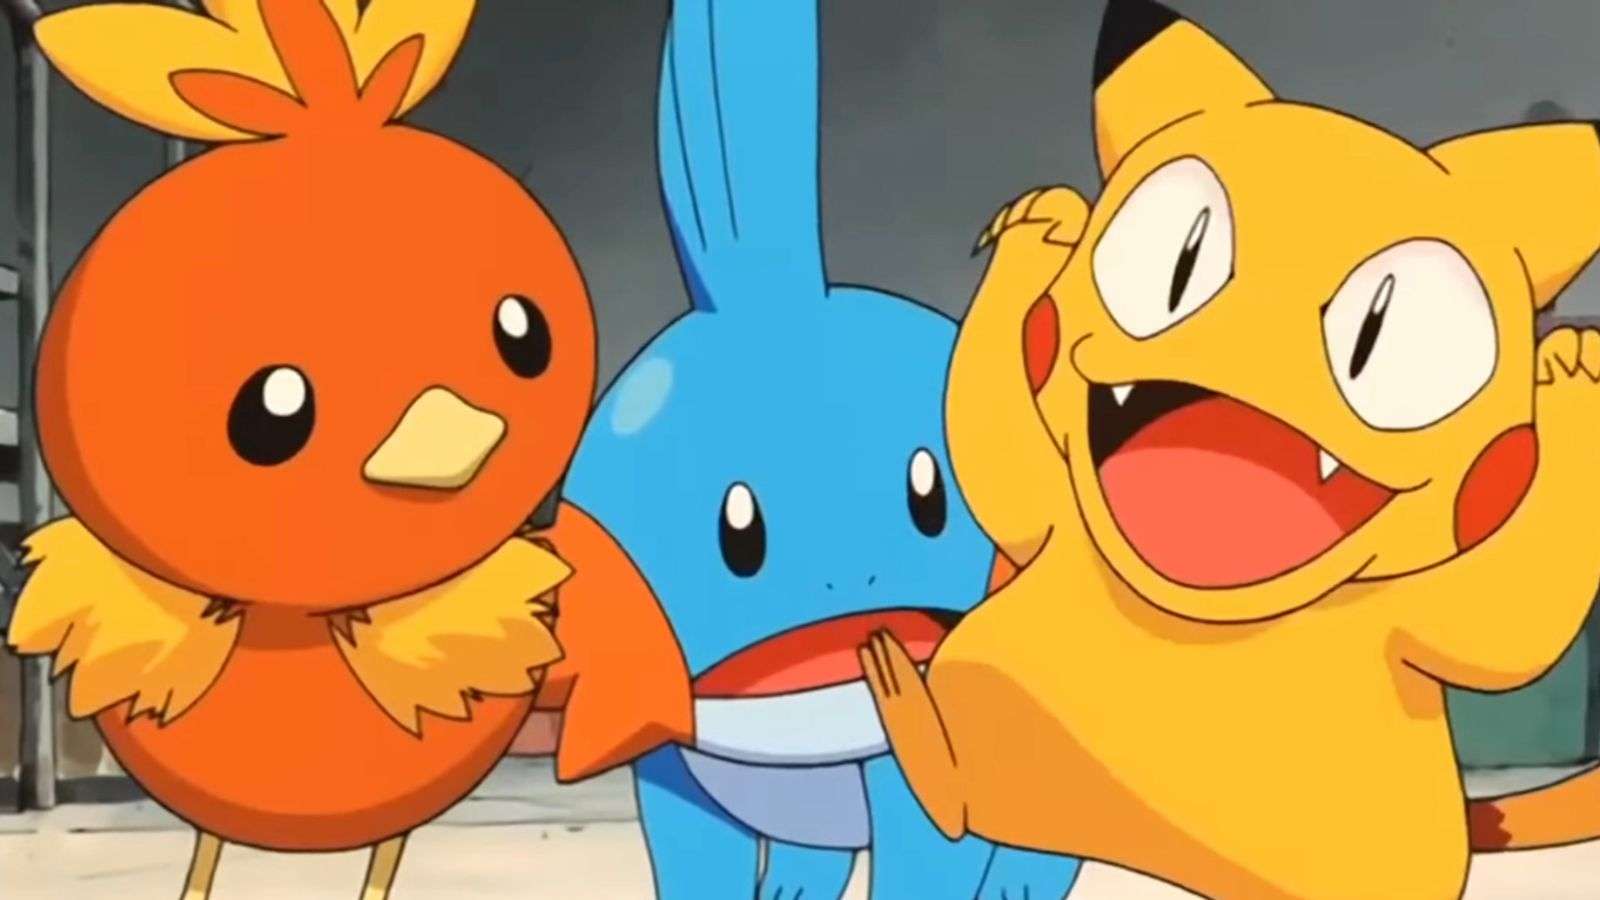 Torchic, Mudkip, and Pikachu pretending to be Meowth from the Pokemon anime.